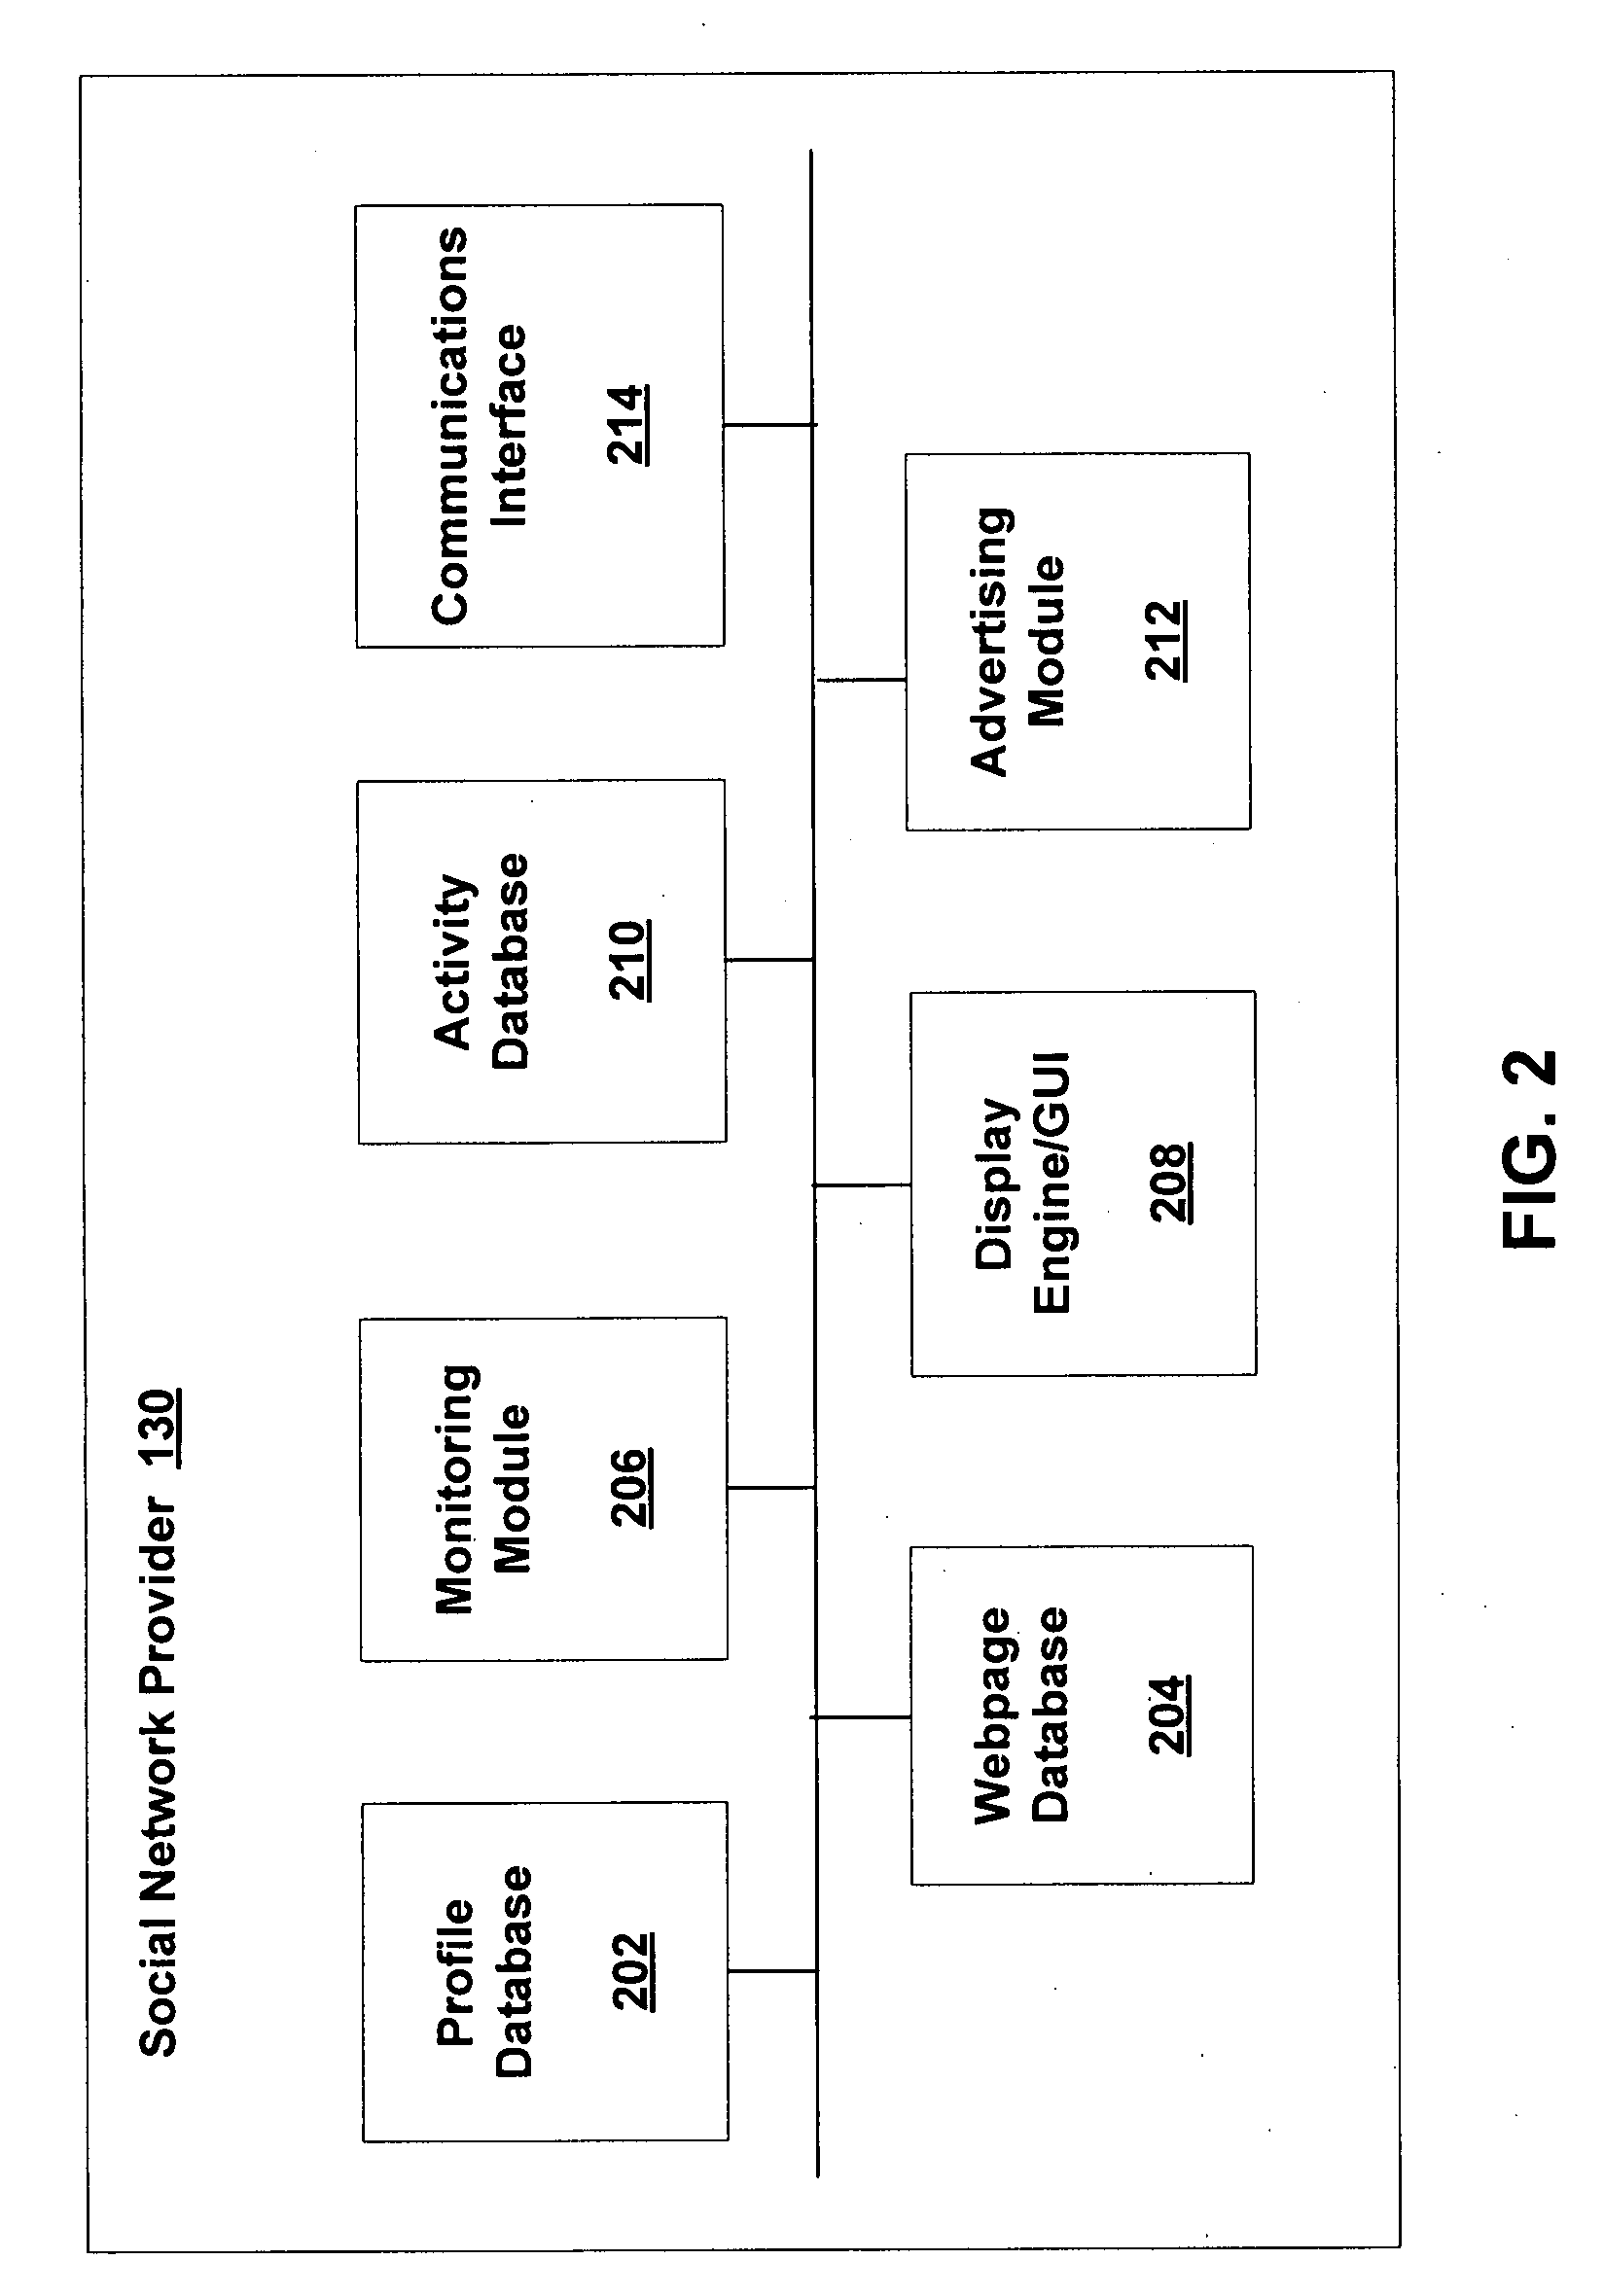 System and method for determining a trust level in a social network environment